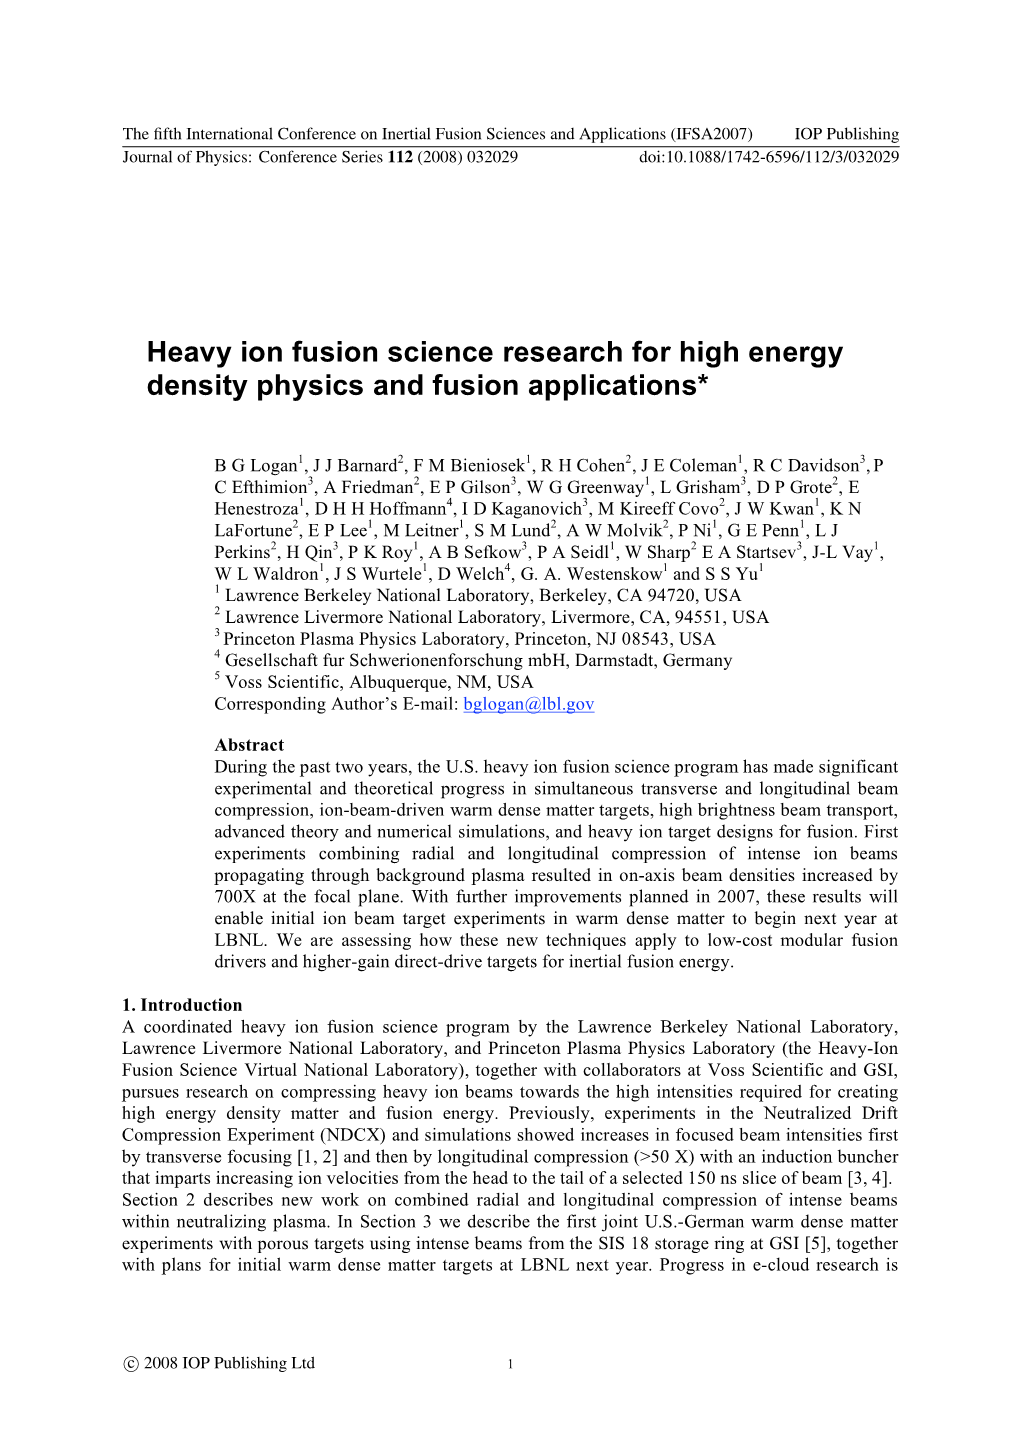 Heavy Ion Fusion Science Research for High Energy Density Physics and Fusion Applications*